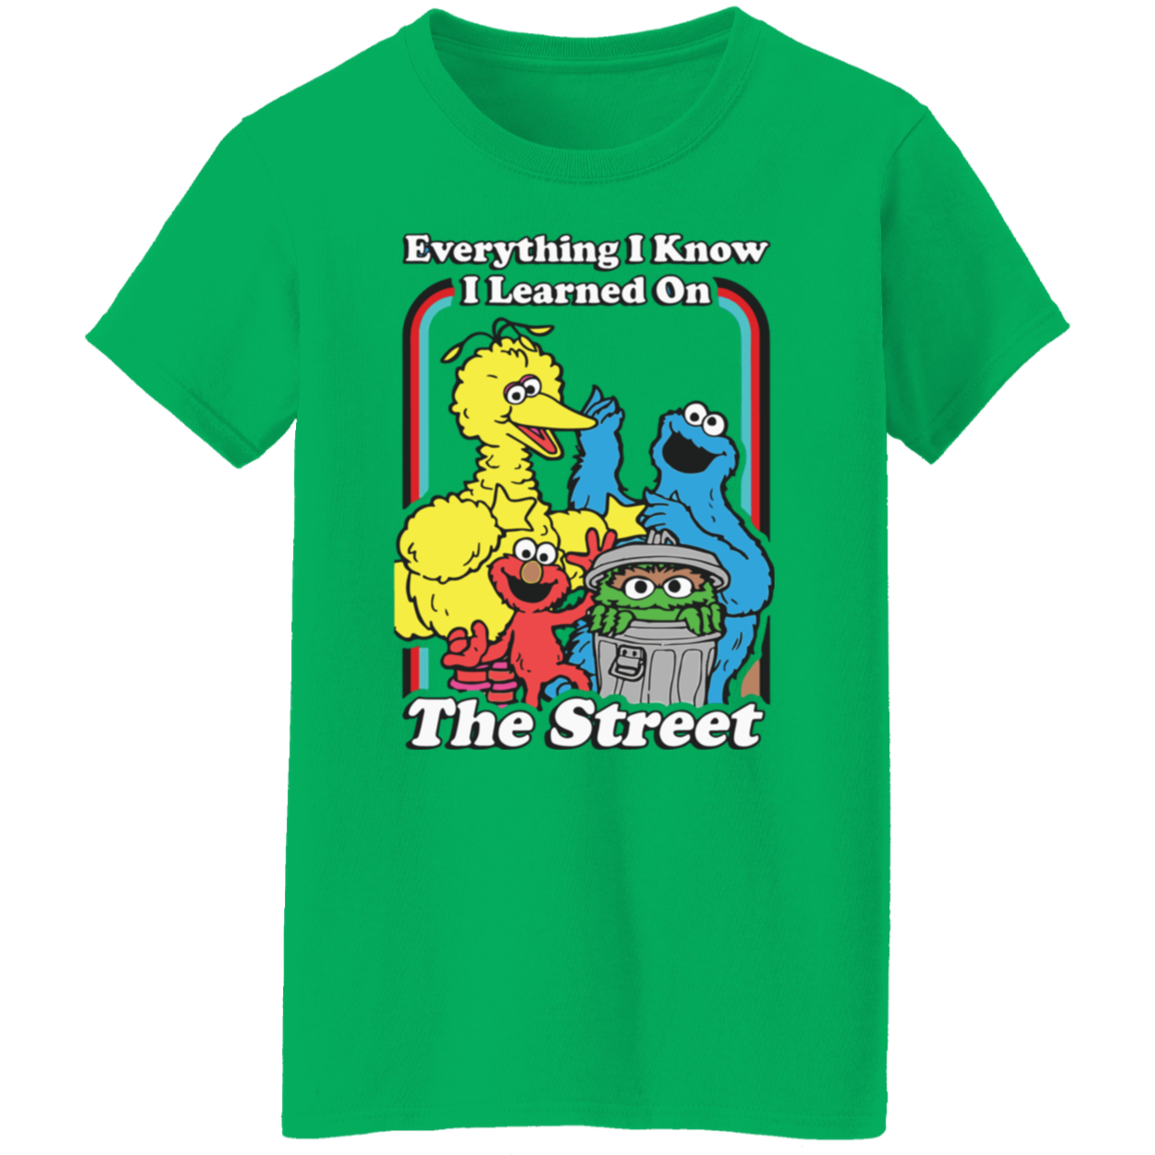 Everything I Know... T-Shirt